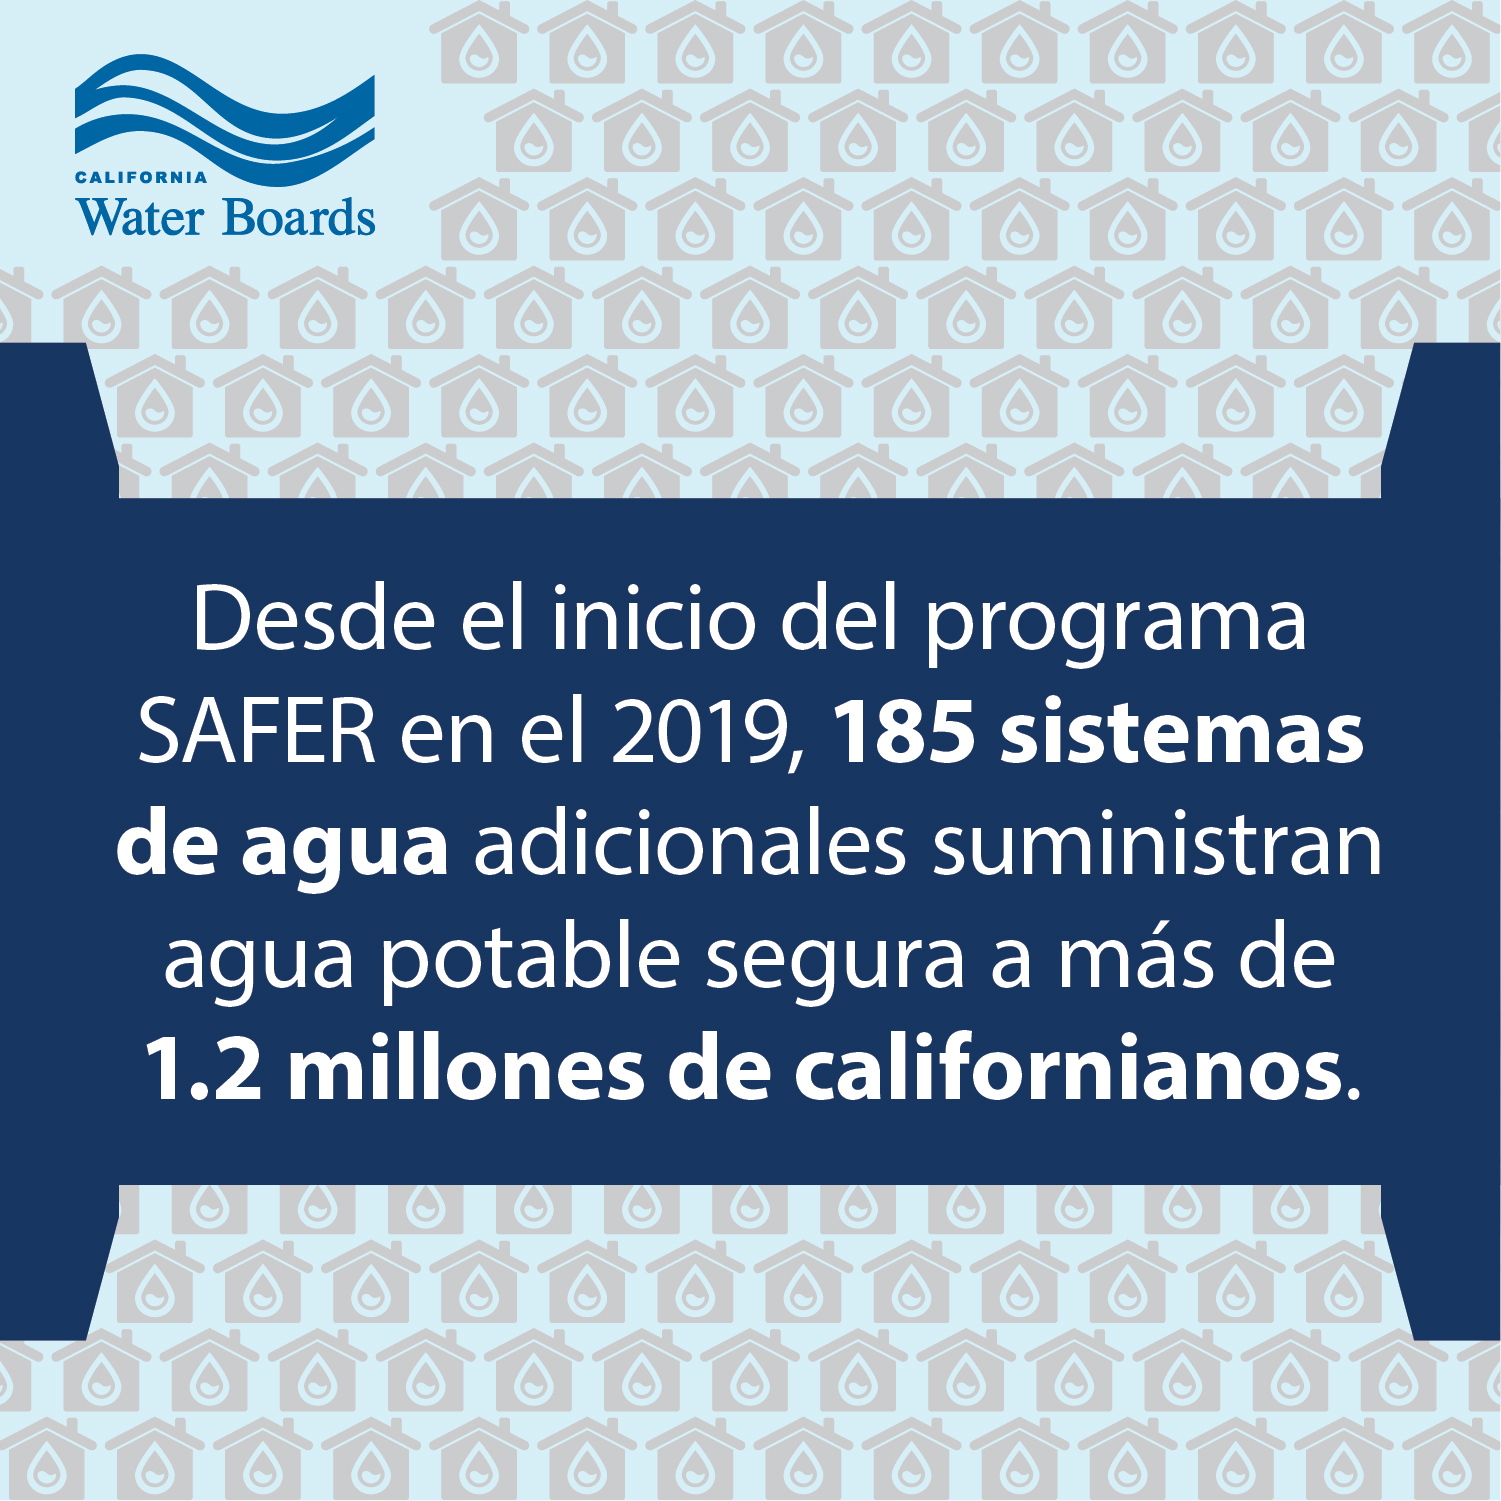 185 water systems created under SAFER